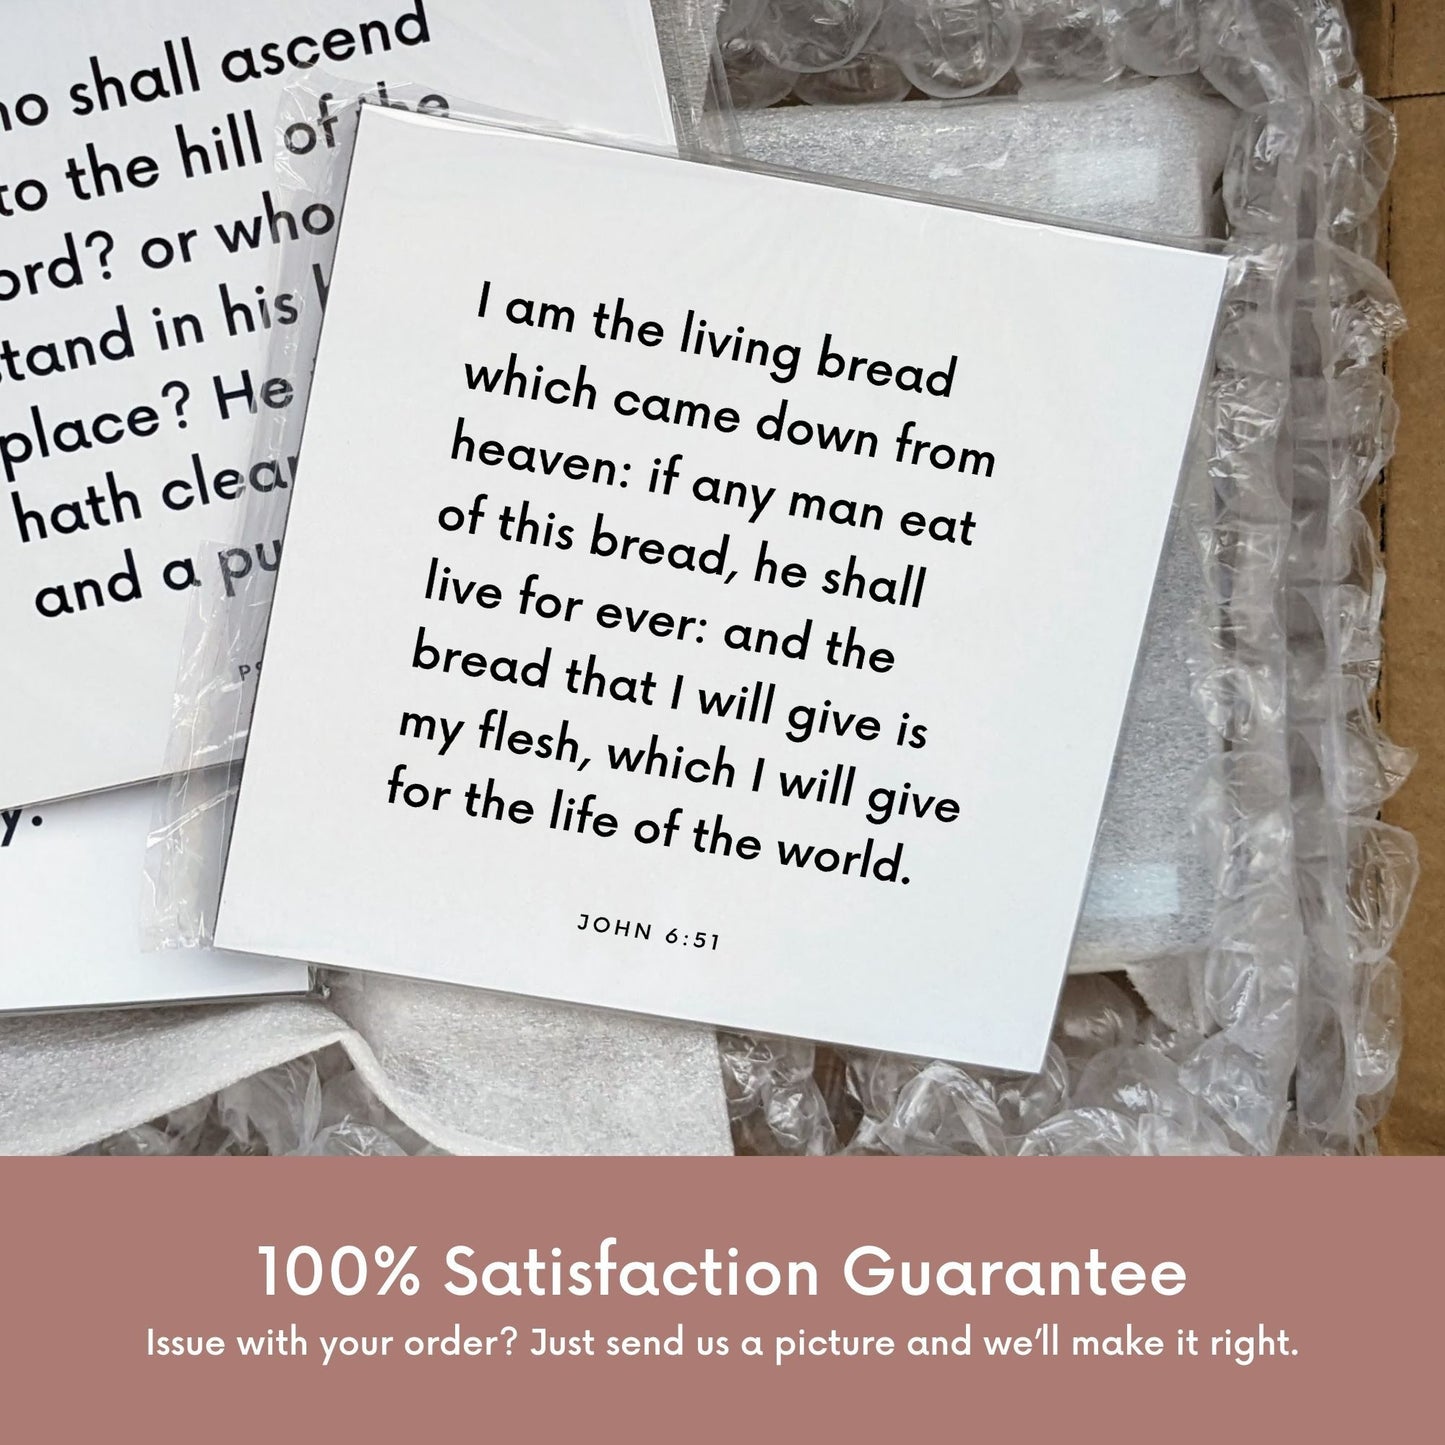 Shipping materials for scripture tile of John 6:51 - "The bread that I will give is my flesh"